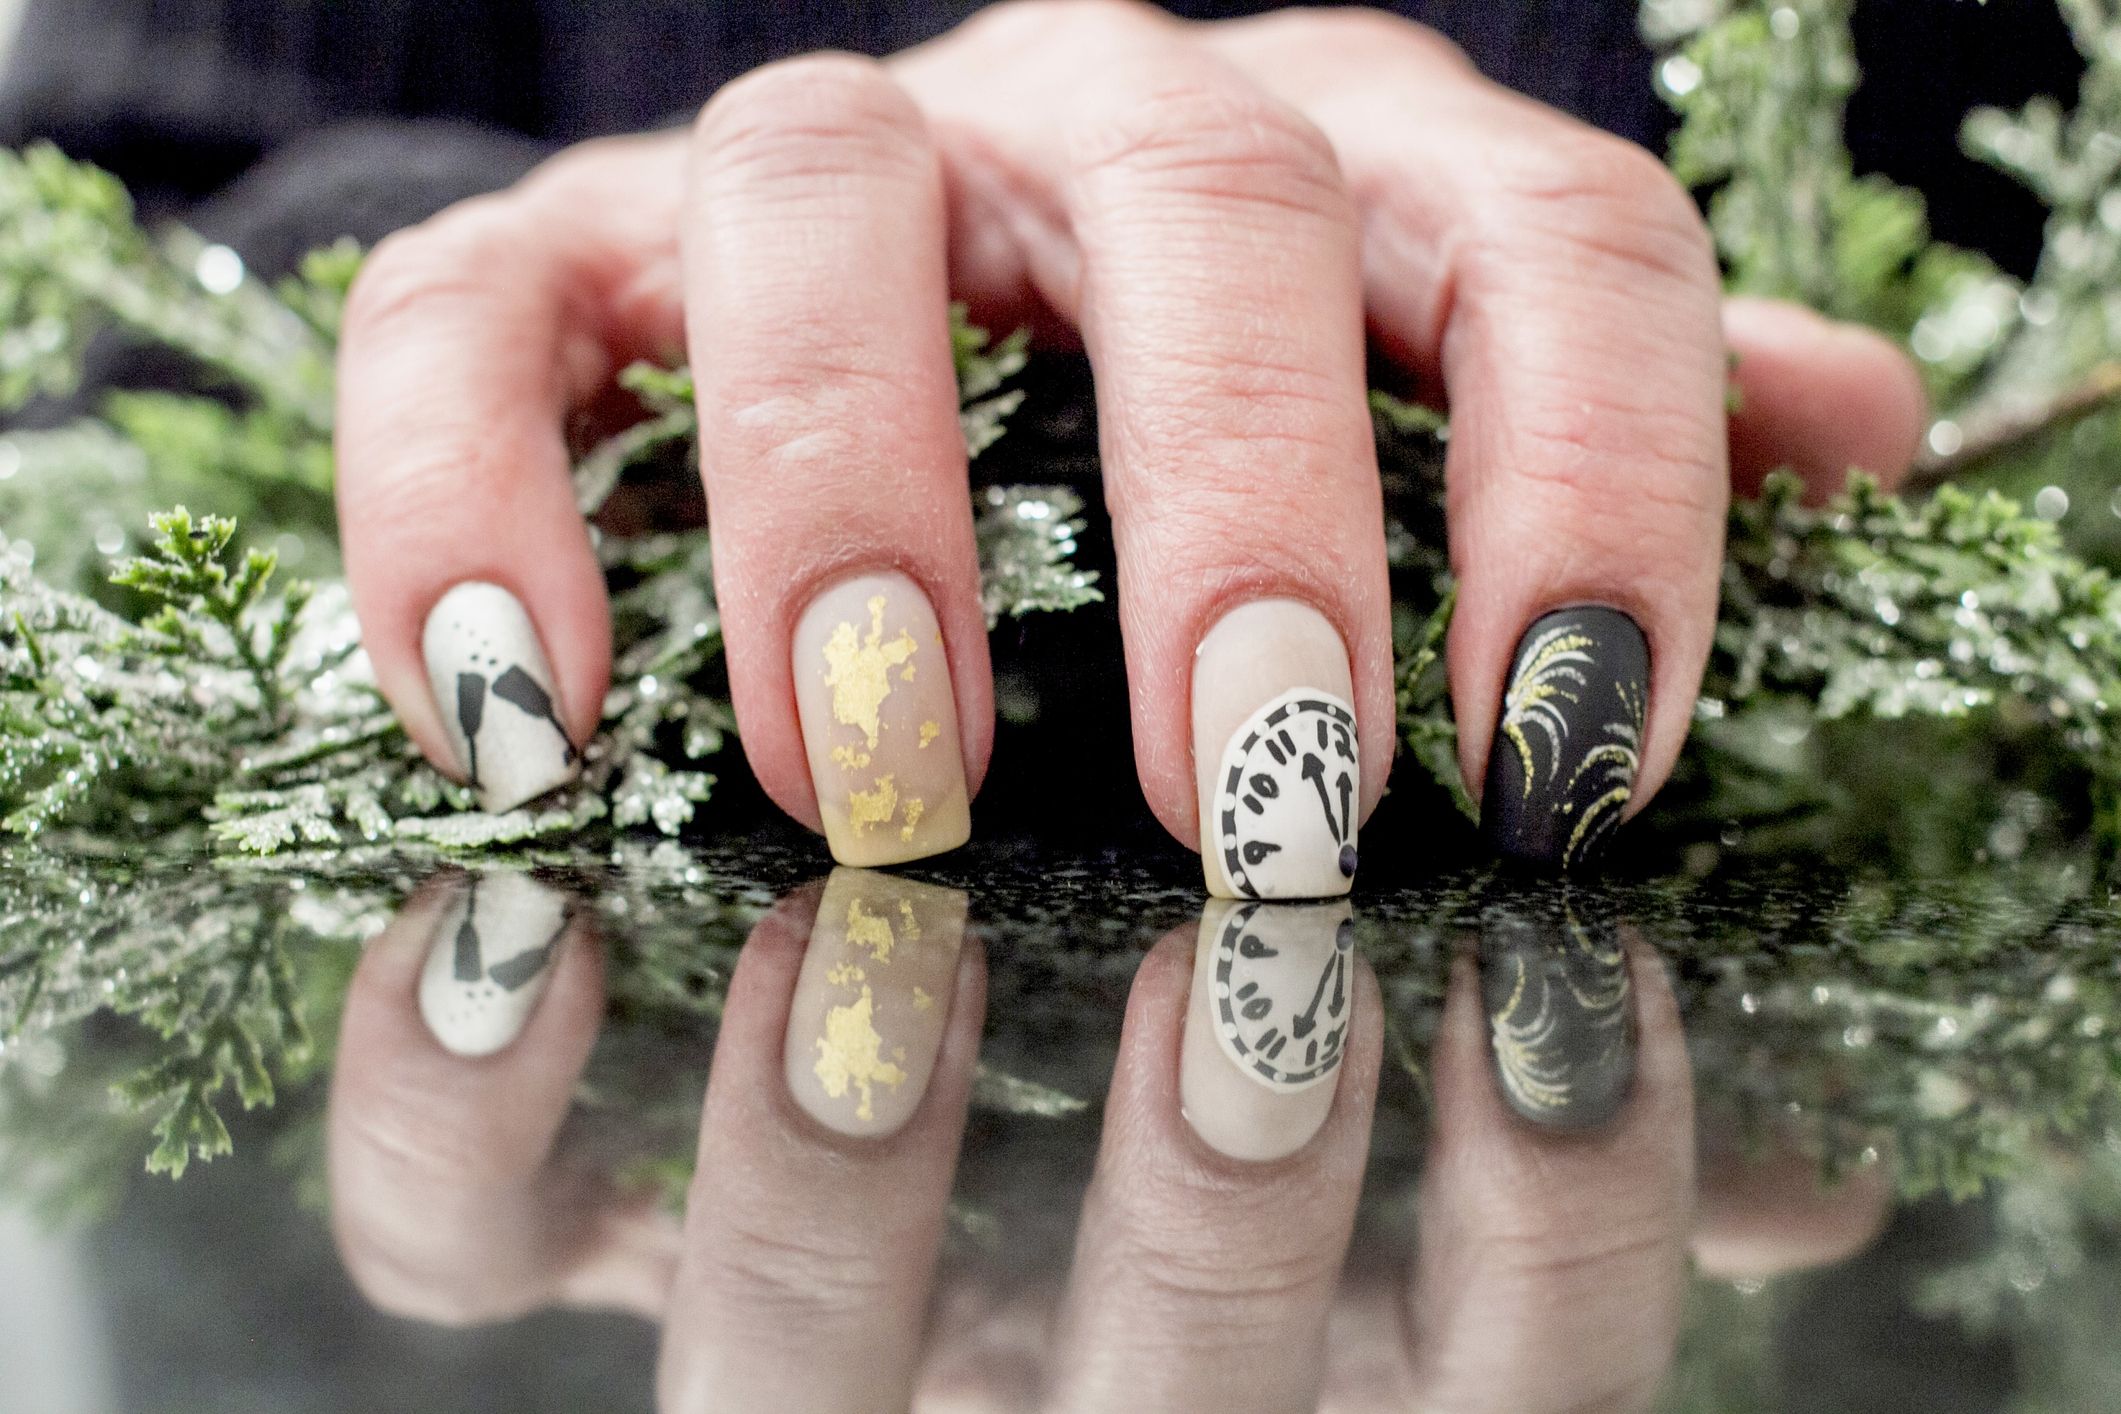 5 Chinese New Year Nail Art Designs to Try | Tatler Asia